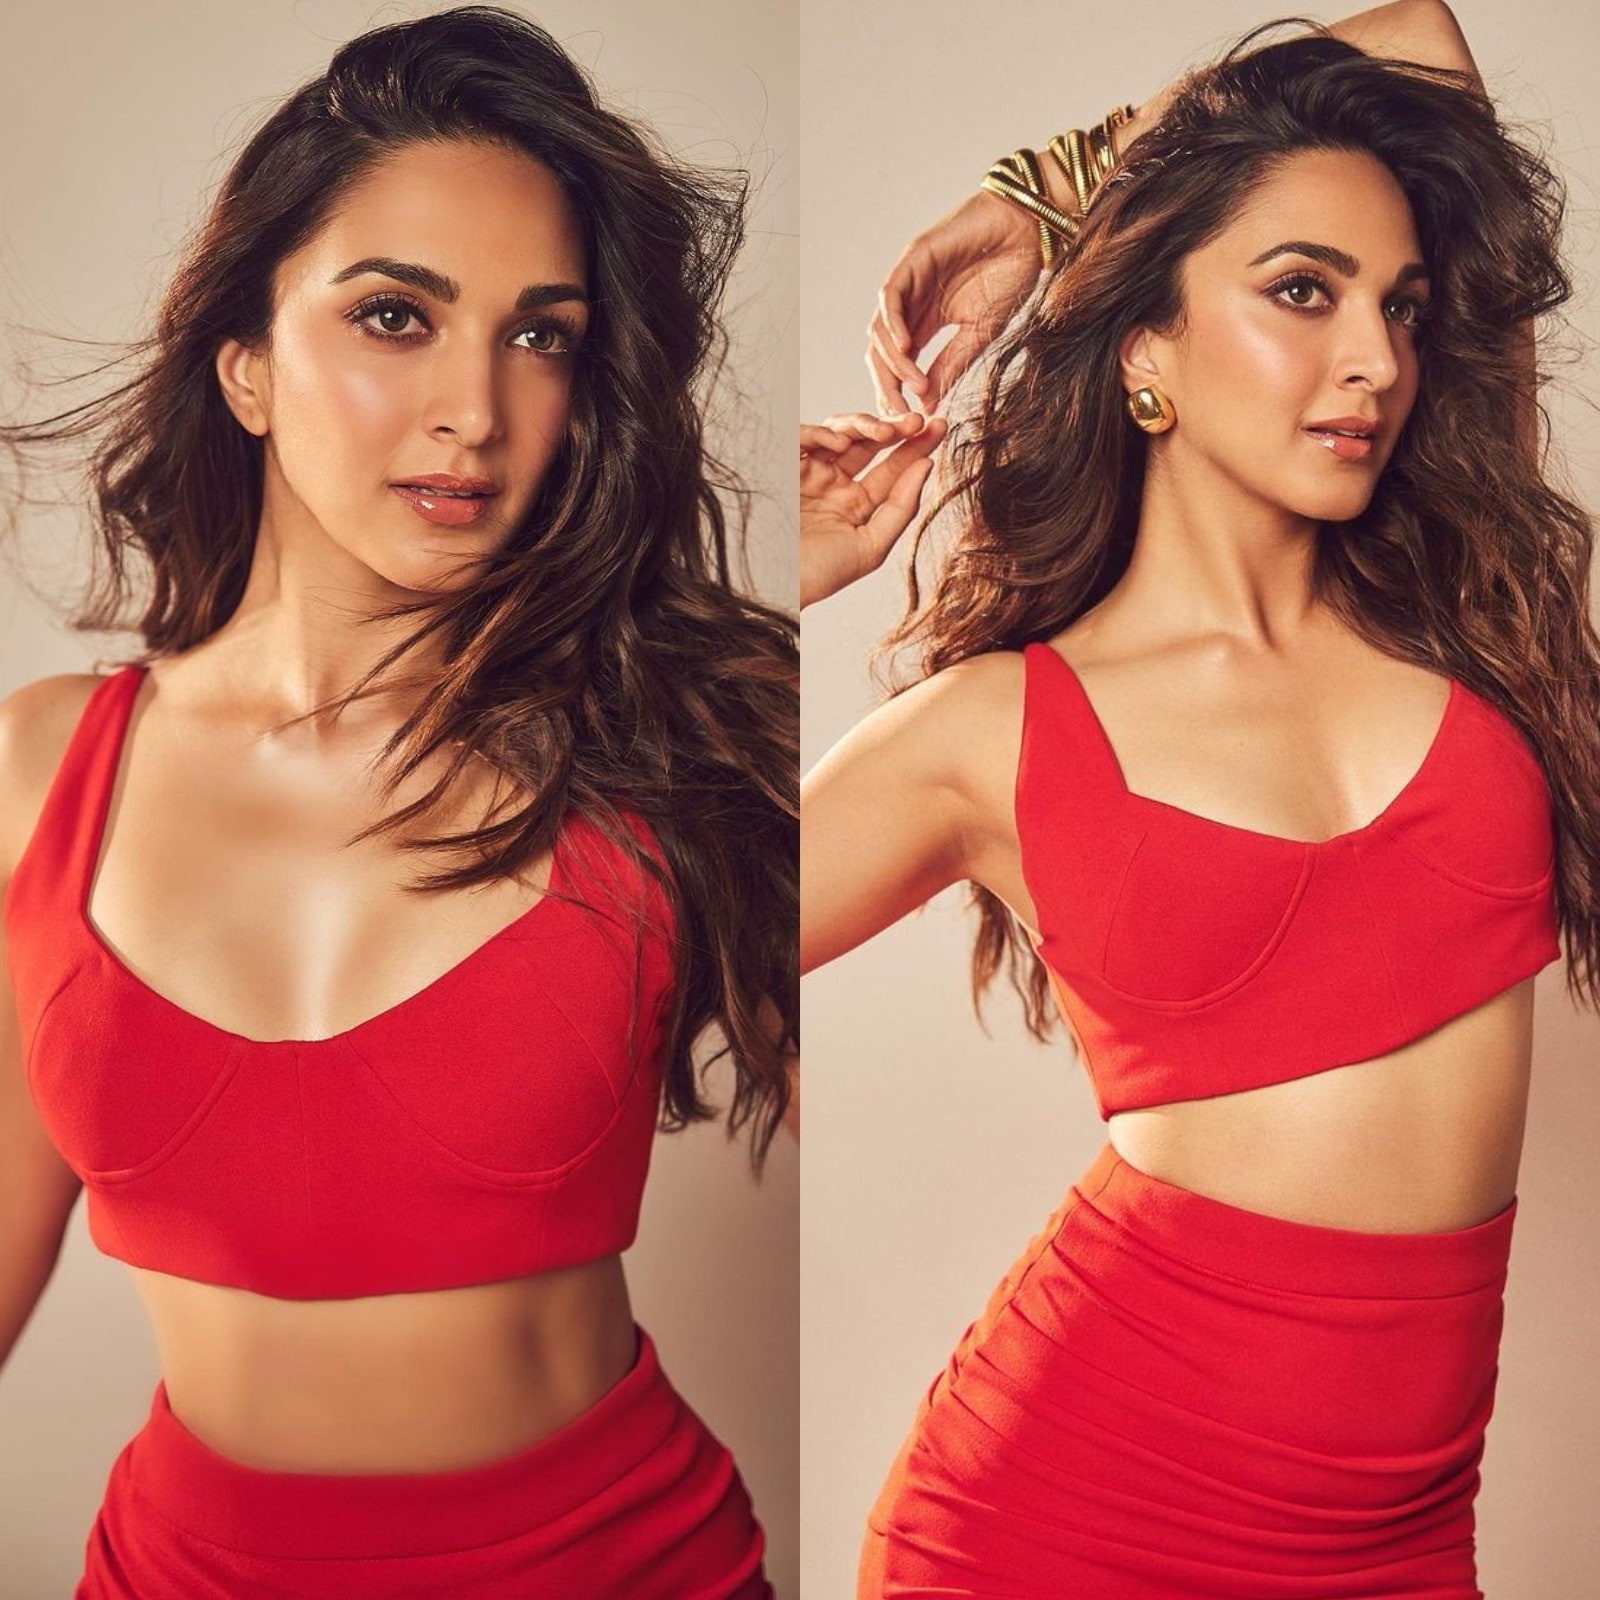 Kiara Advani Makes Fans Go 'OMG' As She Flaunts Her Curves In Red